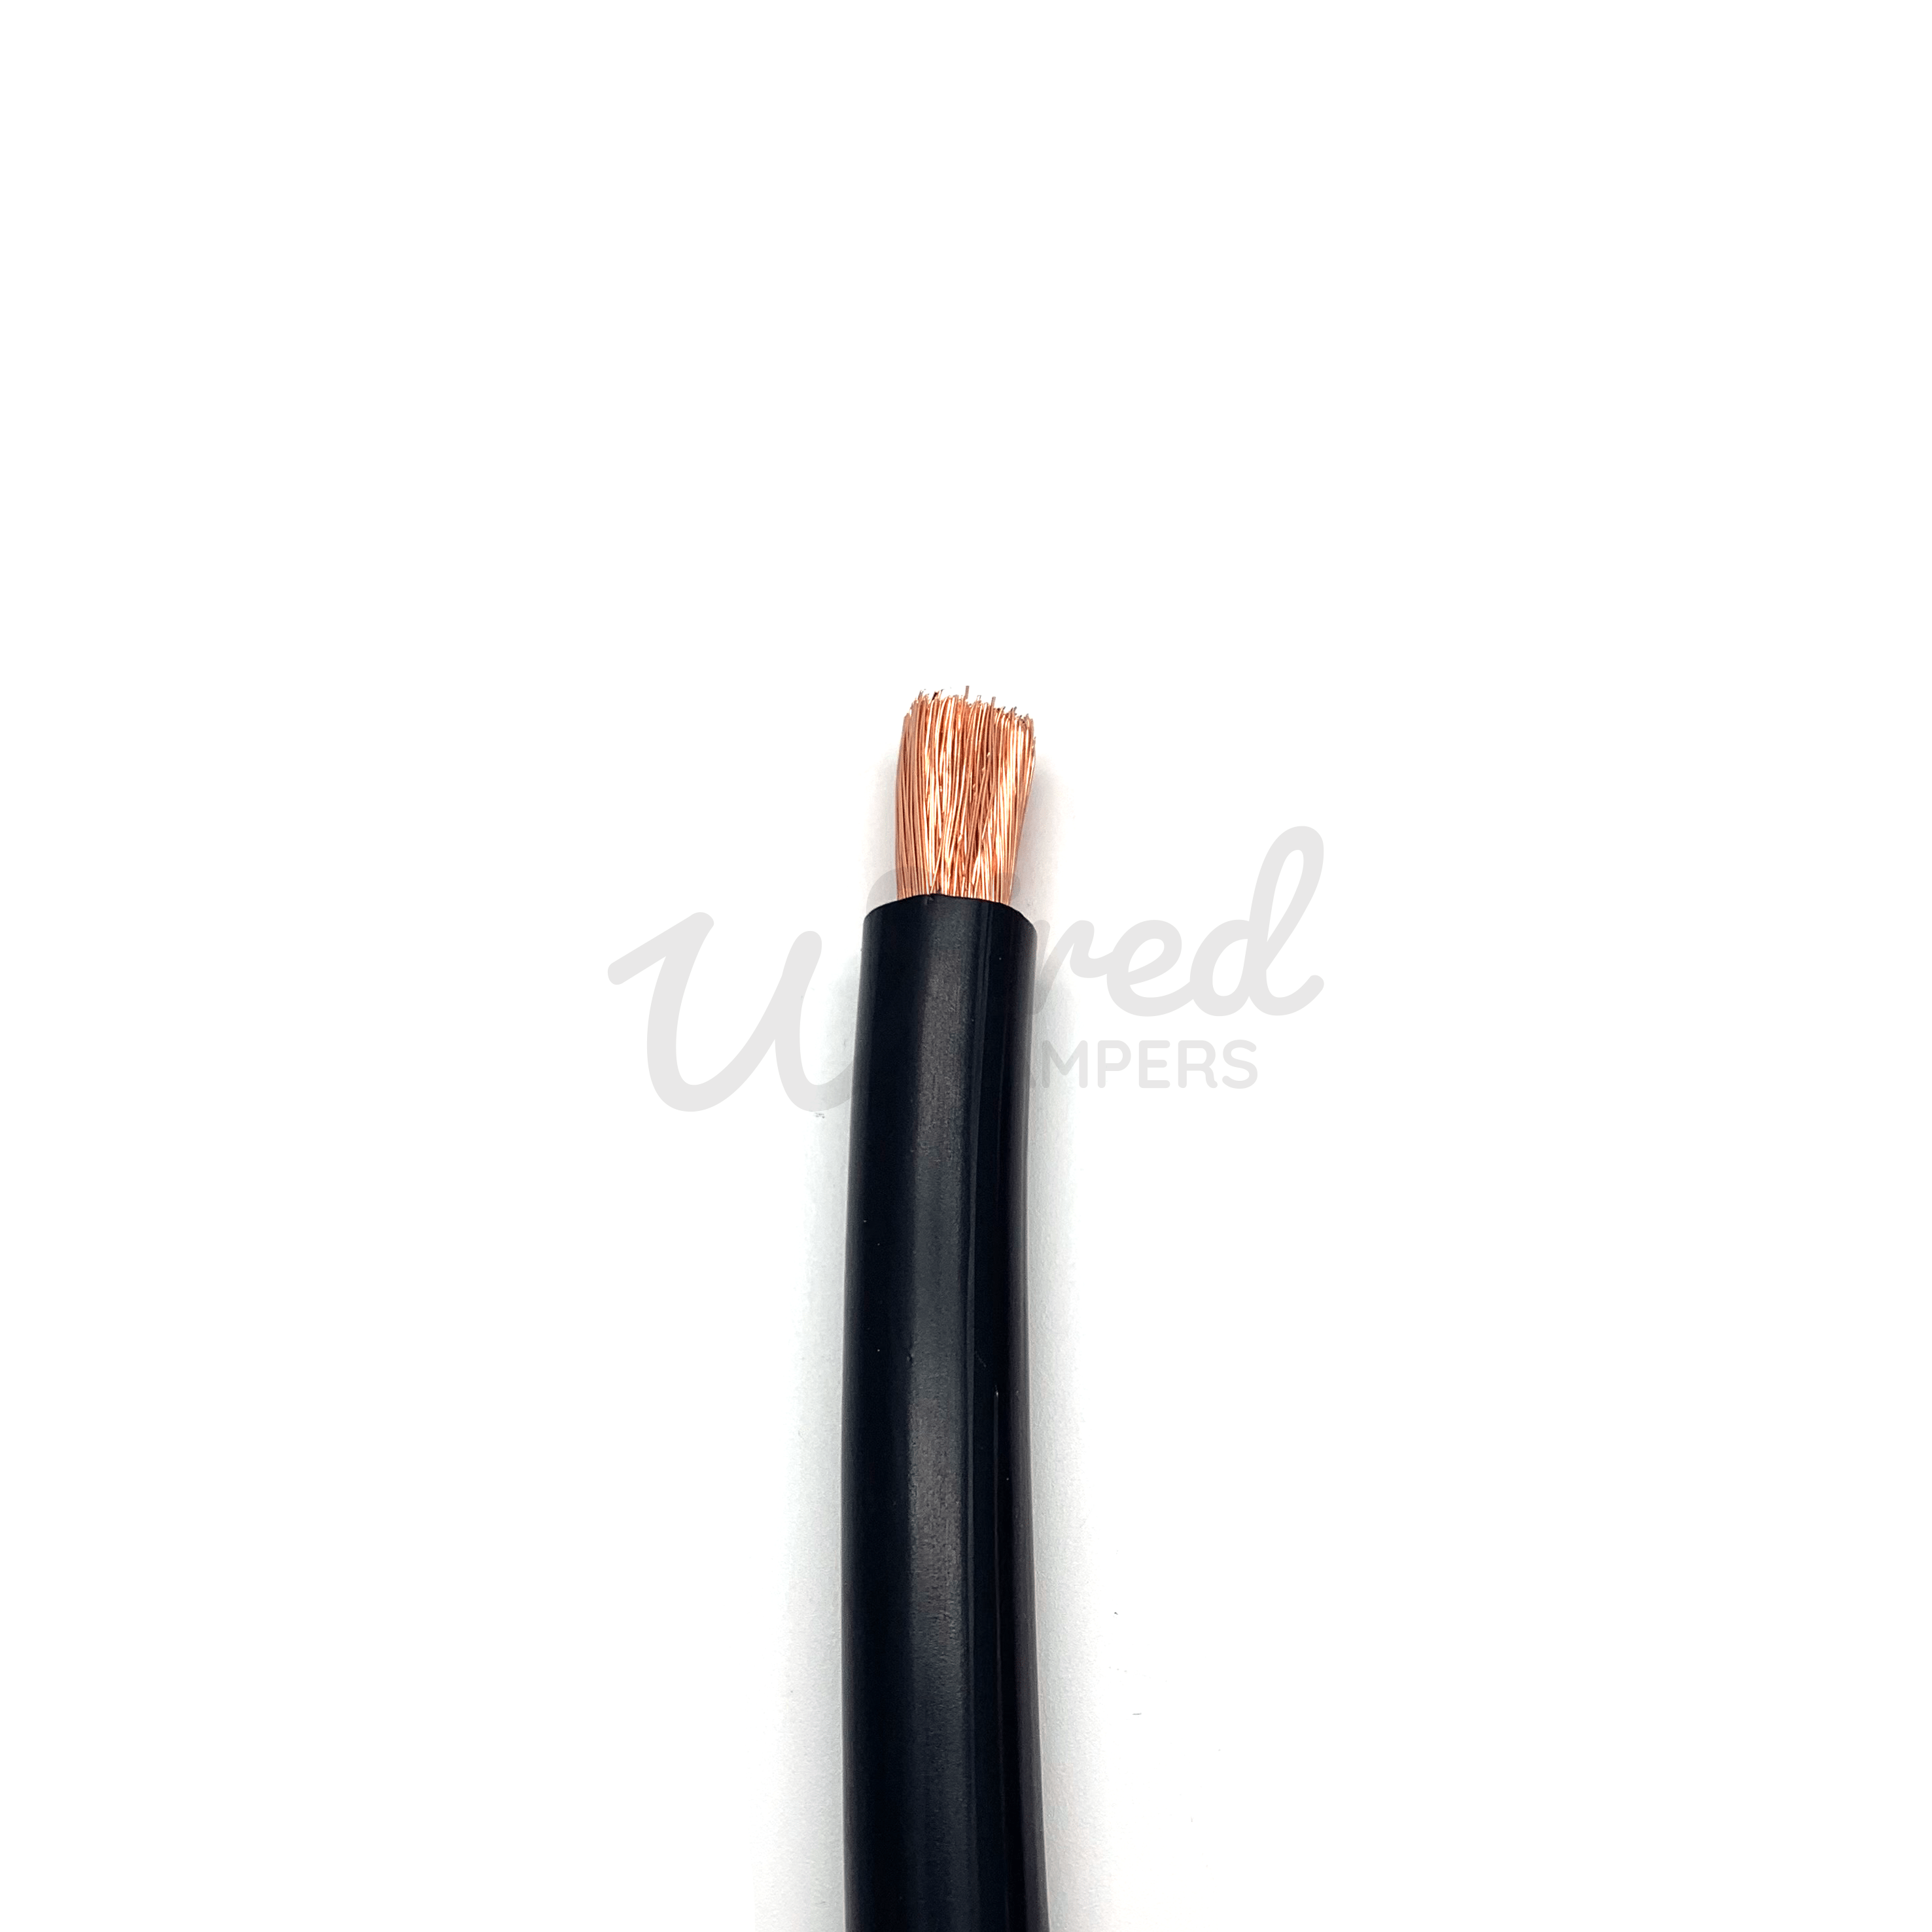 Wired Campers Limited 5M - 25mm² 170A Hi-Flex Battery/Welding/Inverter Flexible Cable - Black Negative